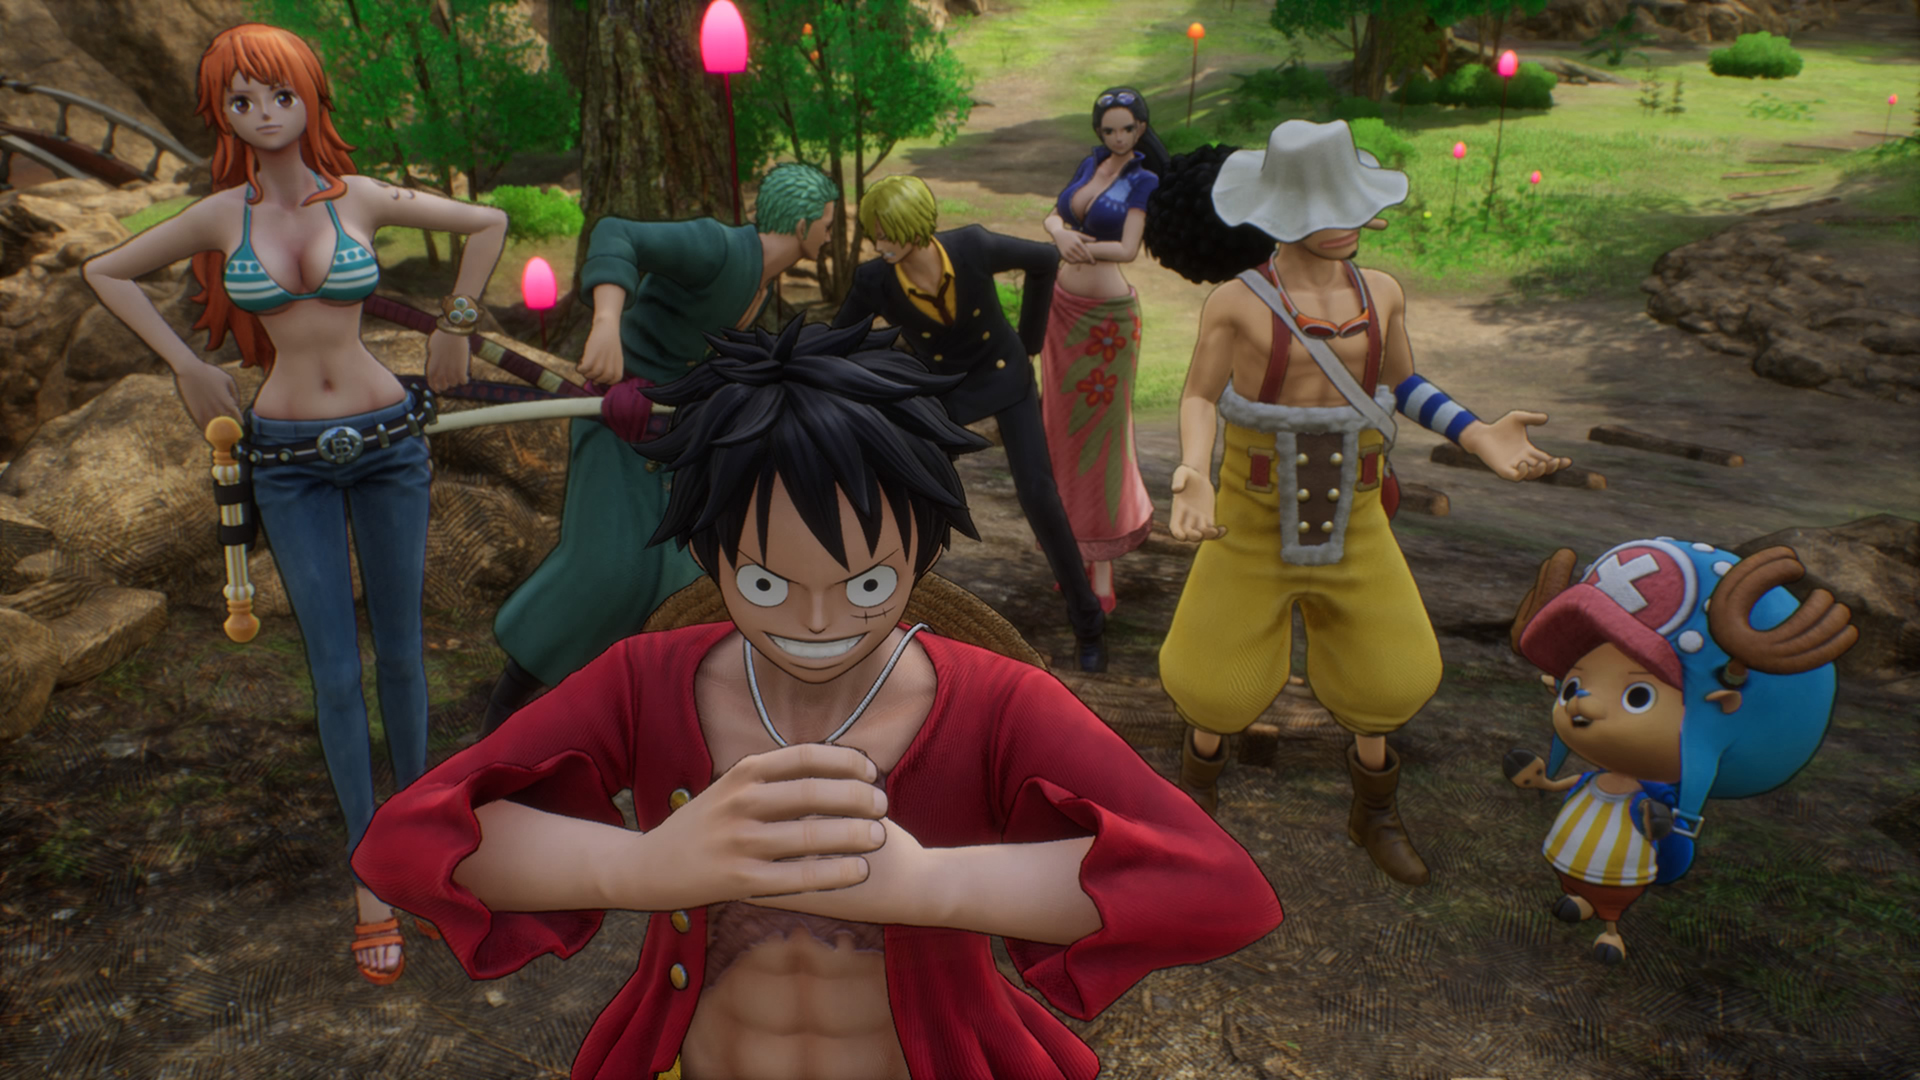 Start Your One Piece Odyssey Adventure with the Free Demo Available Today